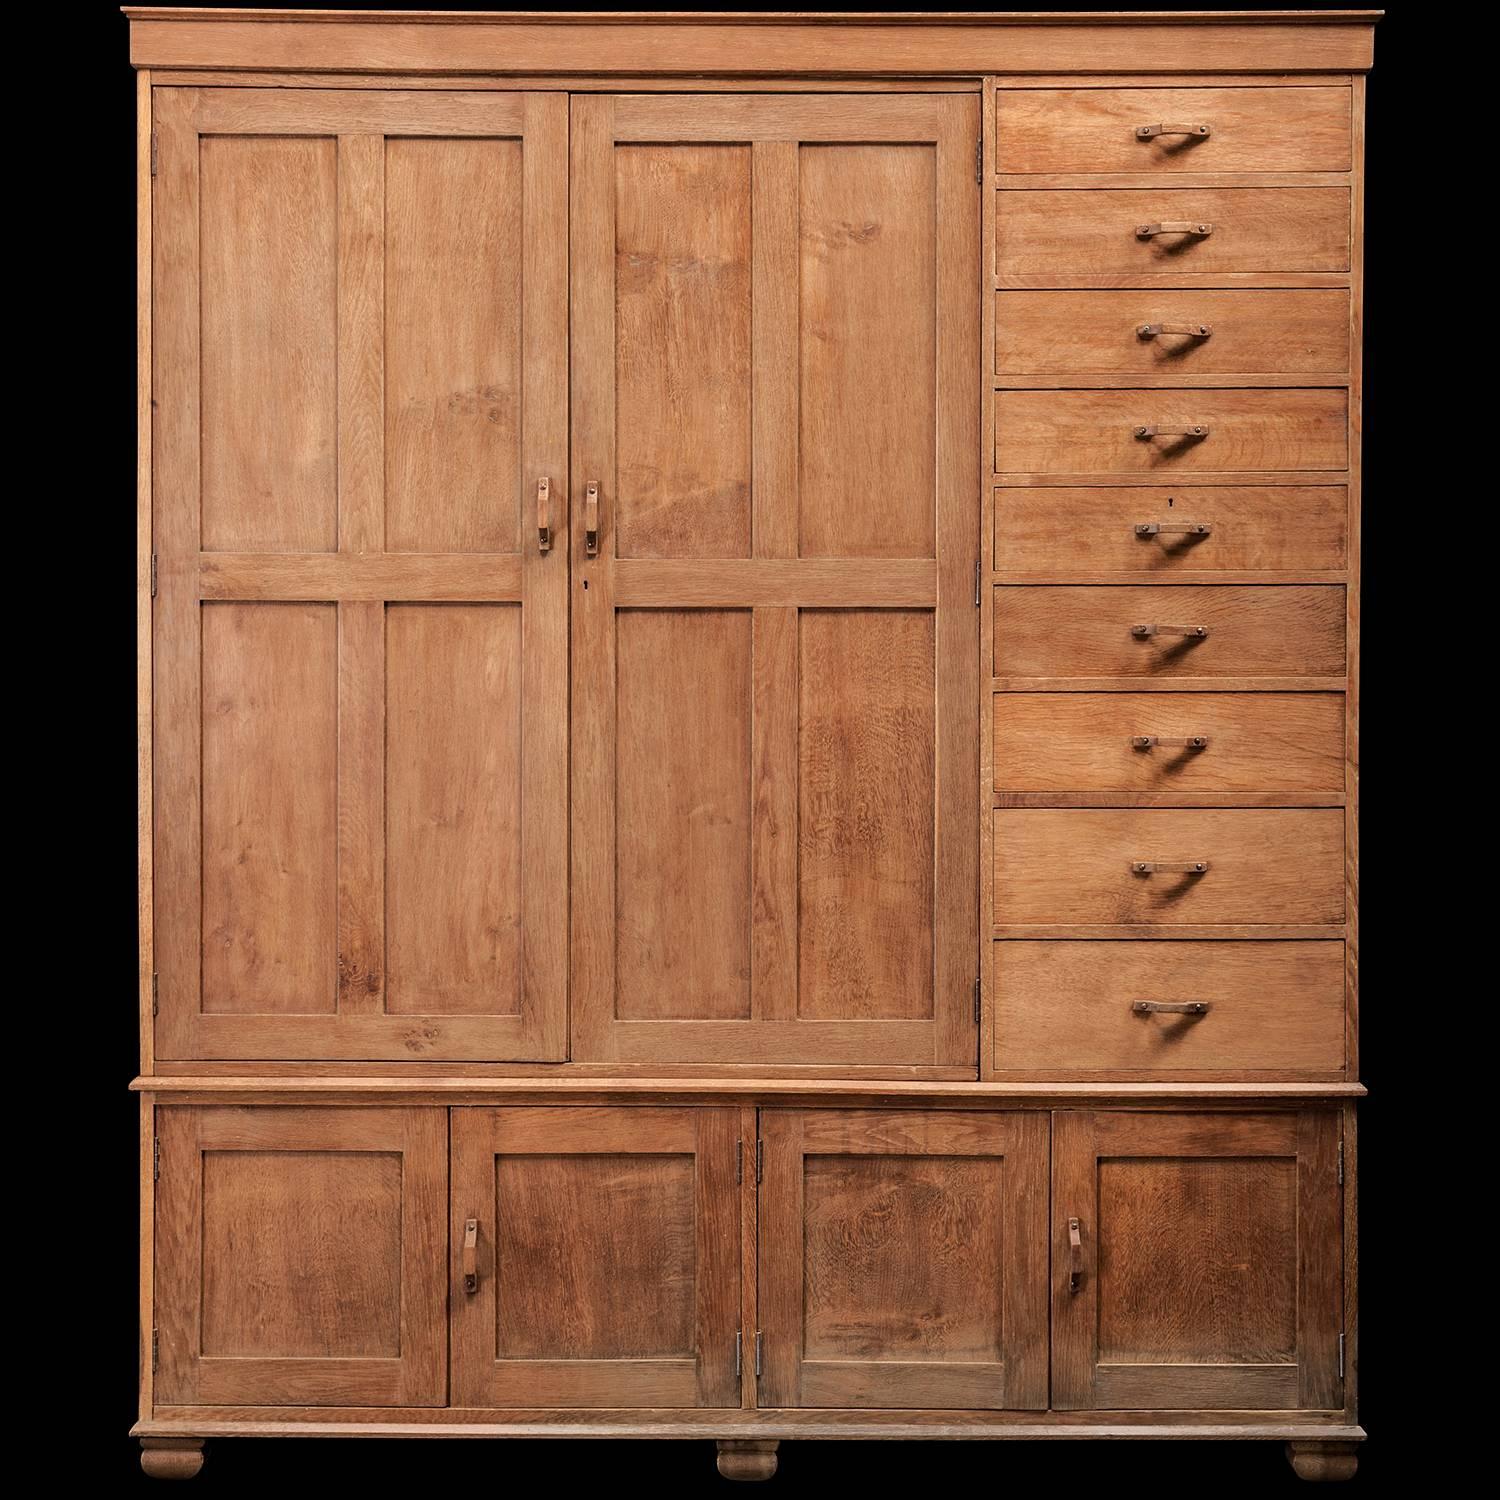 A custom ordered Heals of London wardrobe, featuring a two-door robe pod, cupboard base and tall bank of drawers.